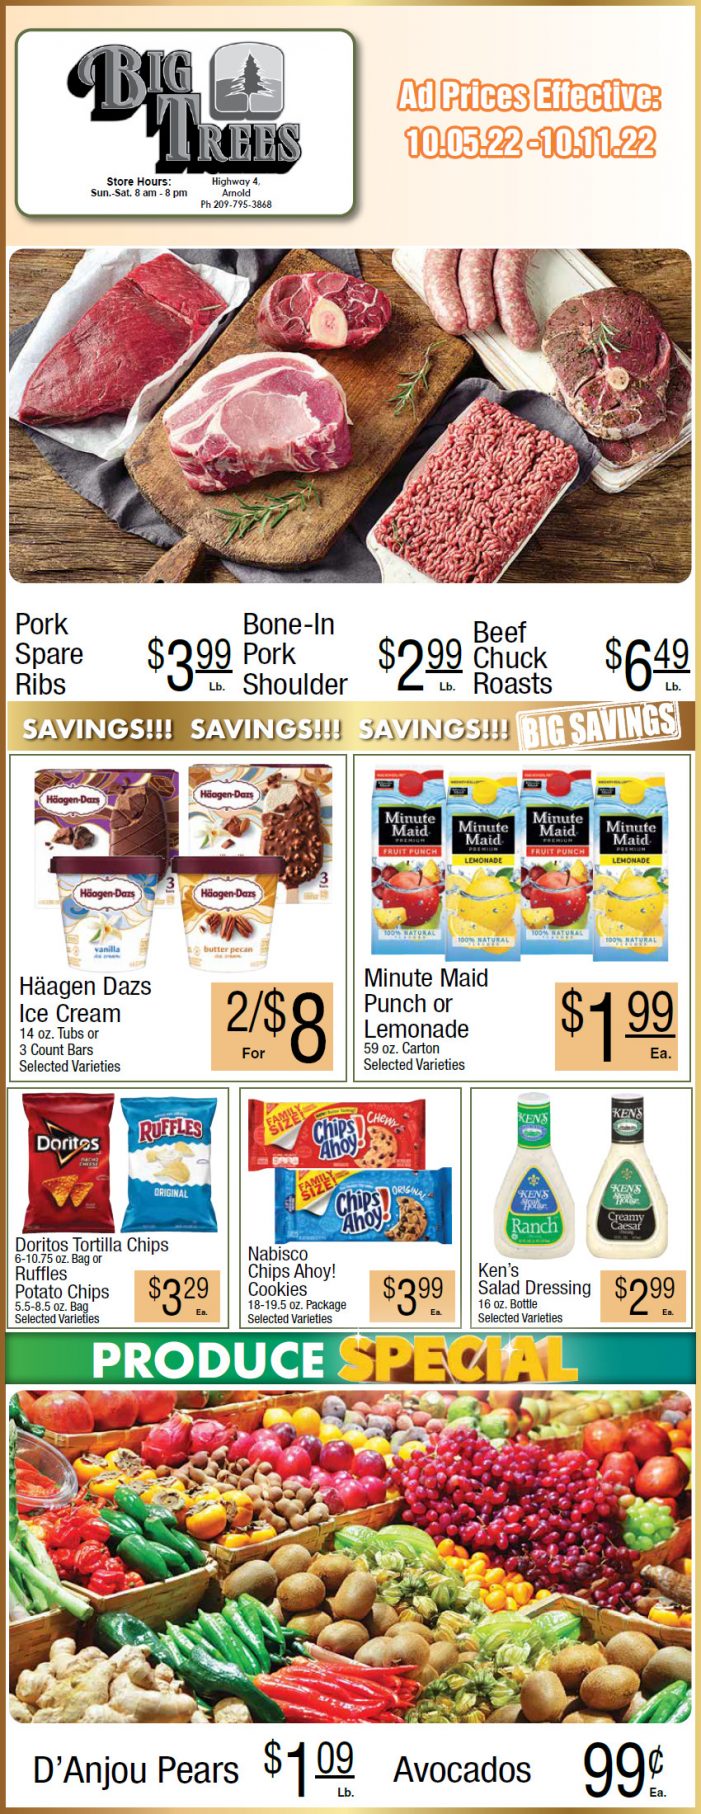 Big Trees Market Weekly Ad & Grocery Specials October 5 – 11!  Shop Local & Save!!